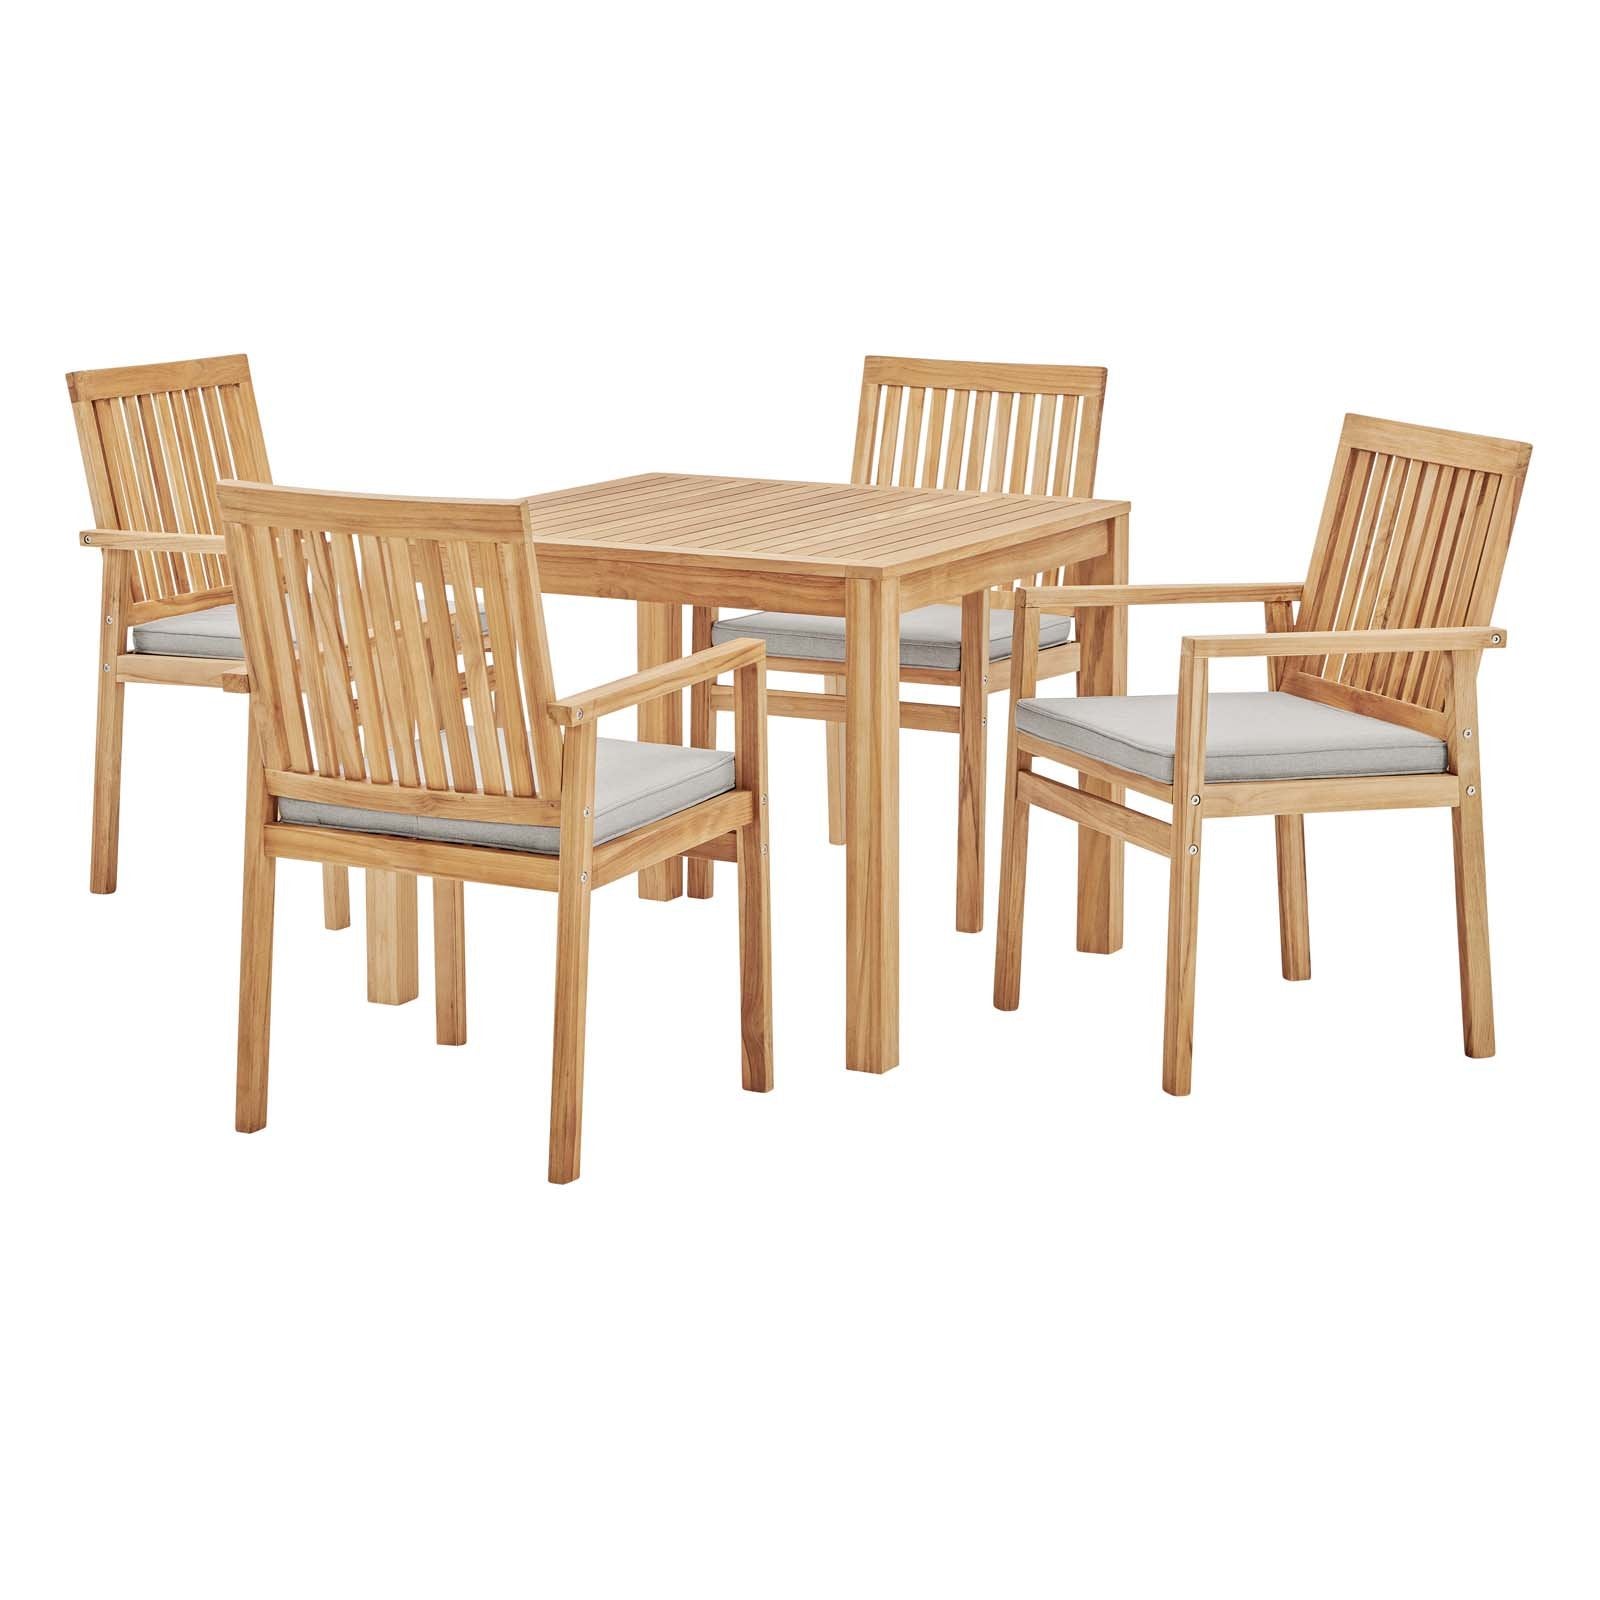 Farmstay 5 Piece Outdoor Patio Teak Wood Dining Set, Natural, Taupe, 5 Piece